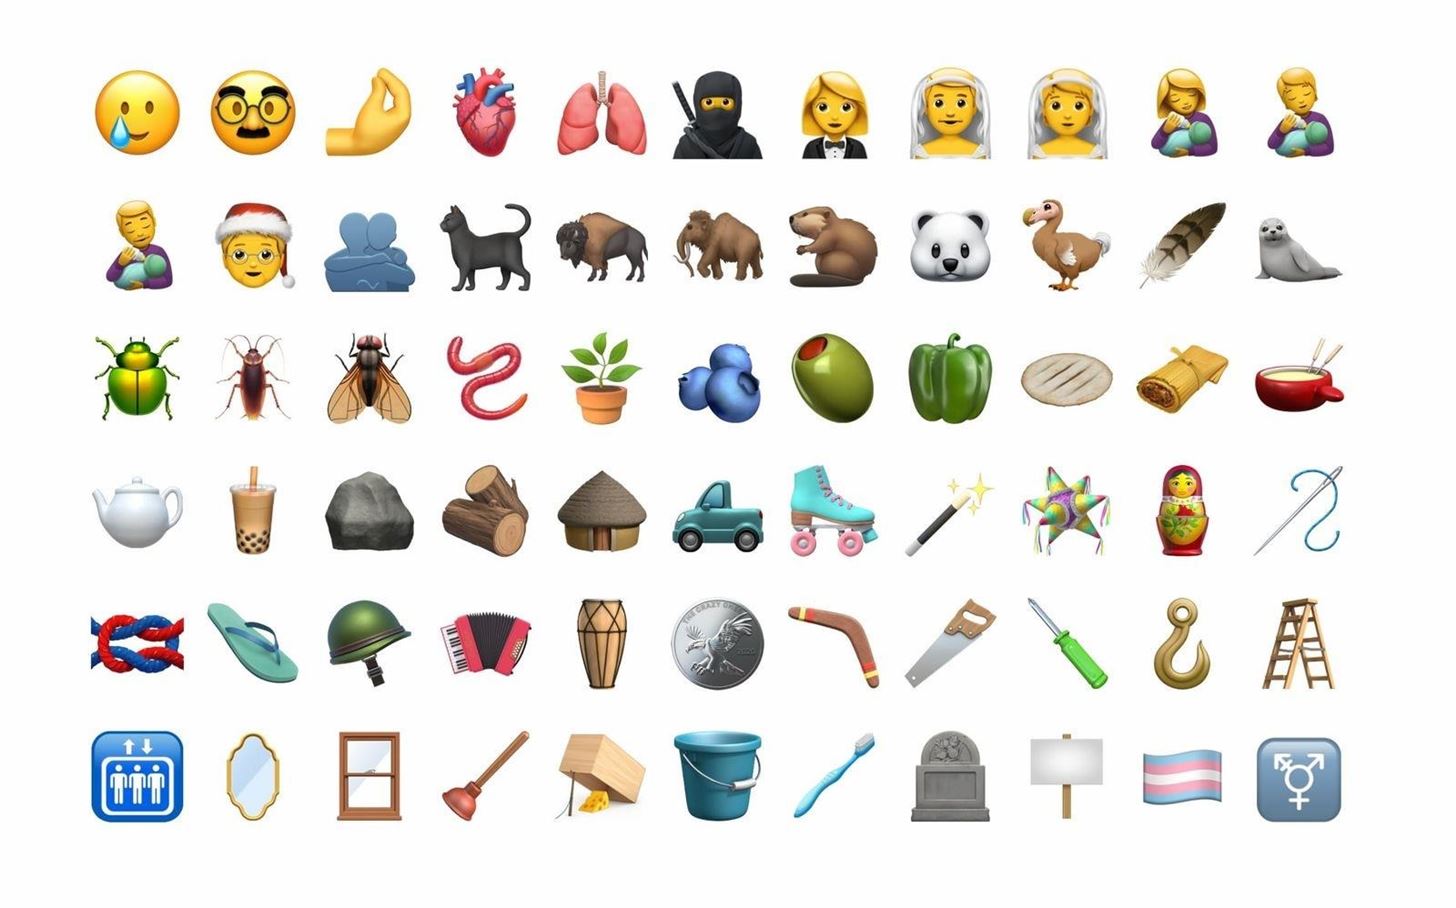 Apple Releases iOS 14.2 Public Beta 2 for iPhone, Introduces New Emoji Including Seal, Ninja, Bubble Tea & More